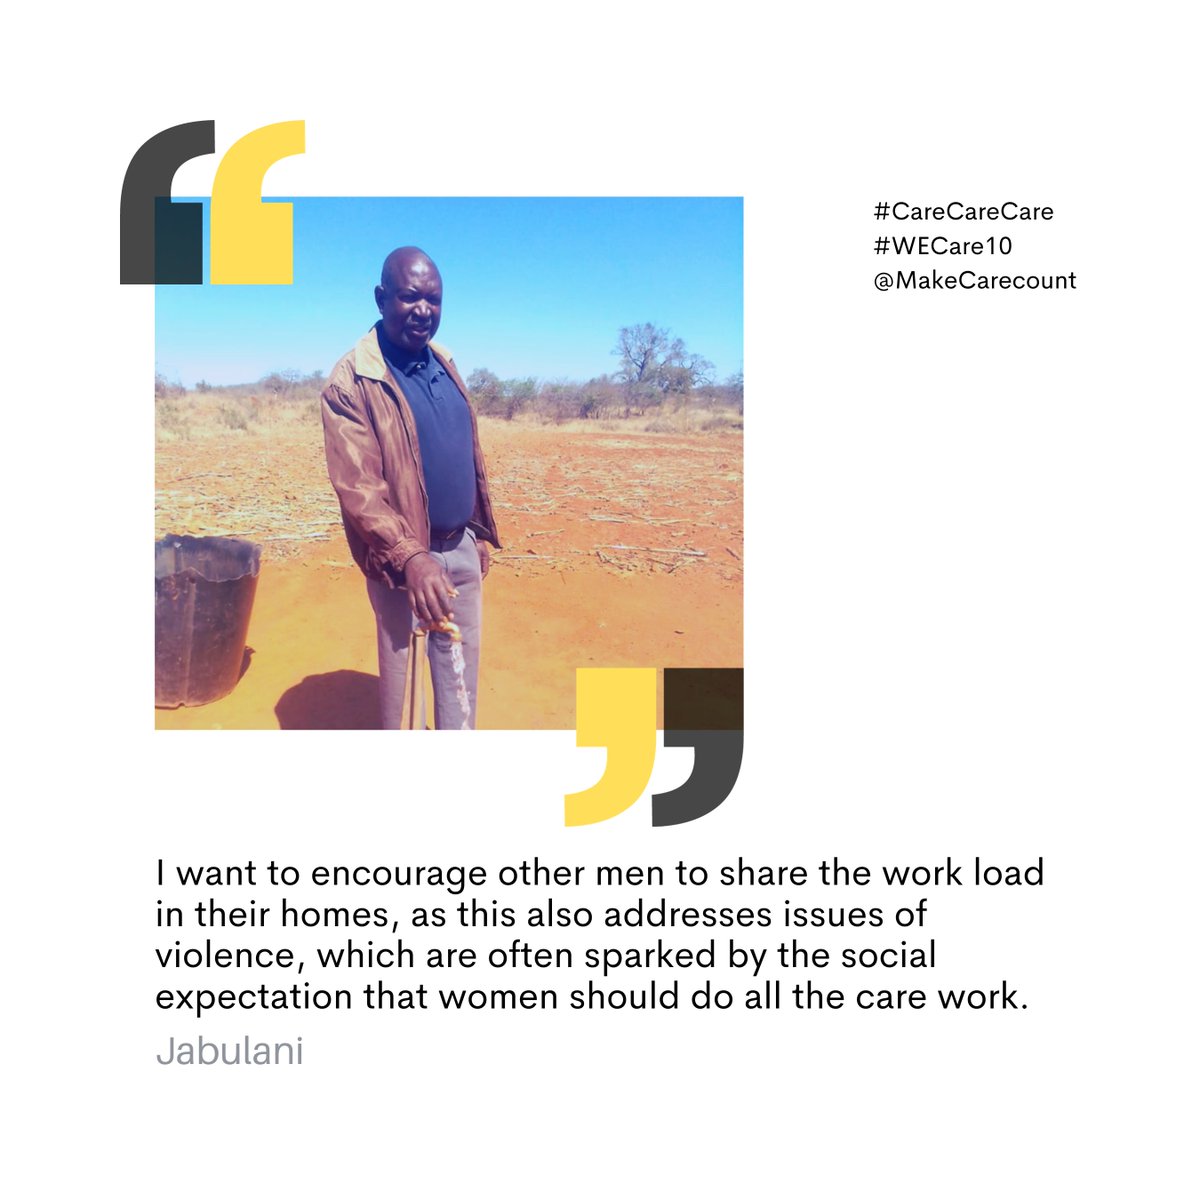 ⭐️ #CareChampions ⭐️ “Some men still cling to harmful cultural norms, such as wife beating, while others justify the inequalities of care work through religious practices that trample upon the #rights & #dignity of women.” —Jabulani This must change. #CareCareCare #WECare10